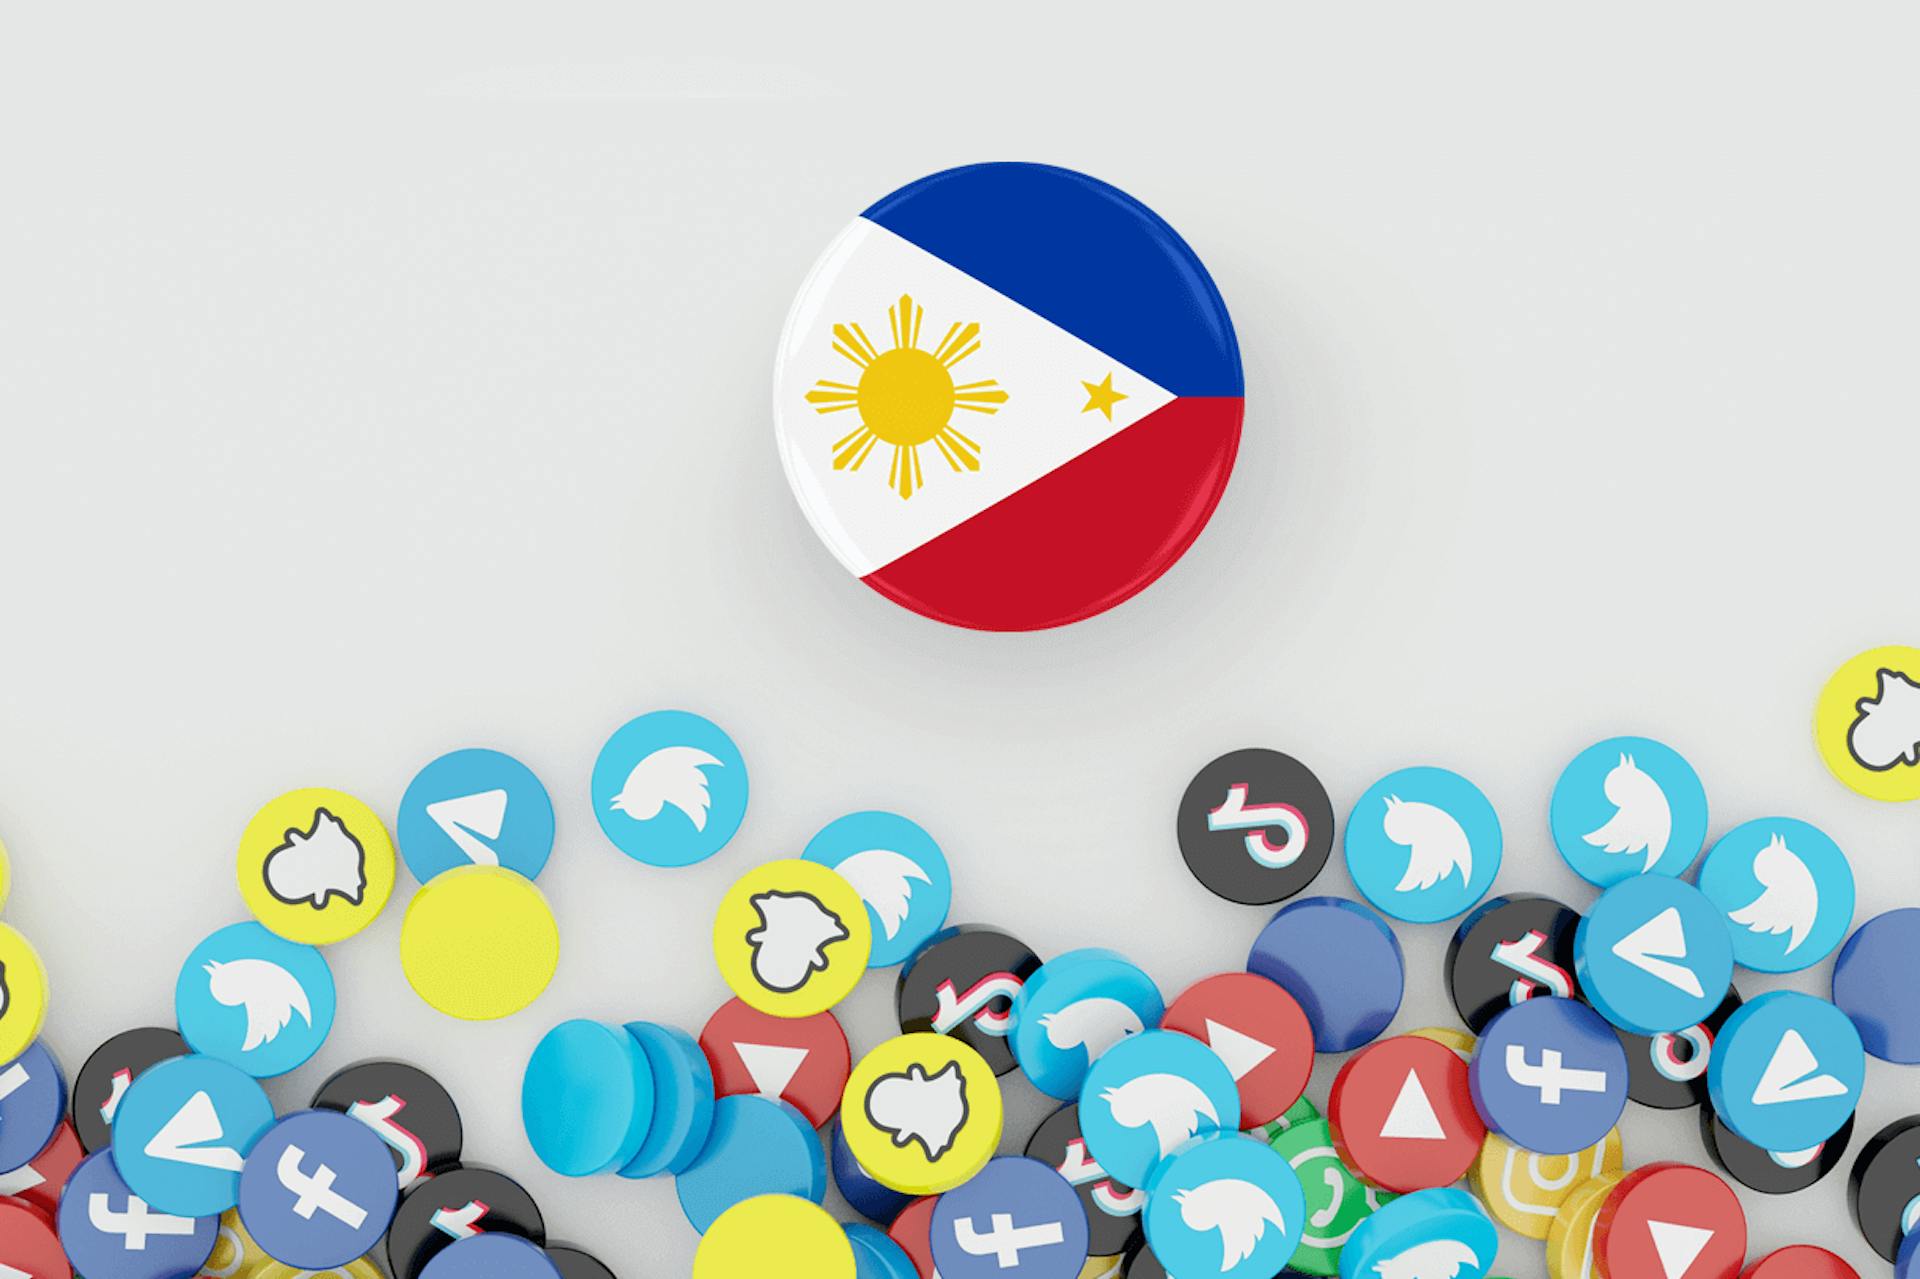 Illustration of social media channel logos with the Philippine flag 